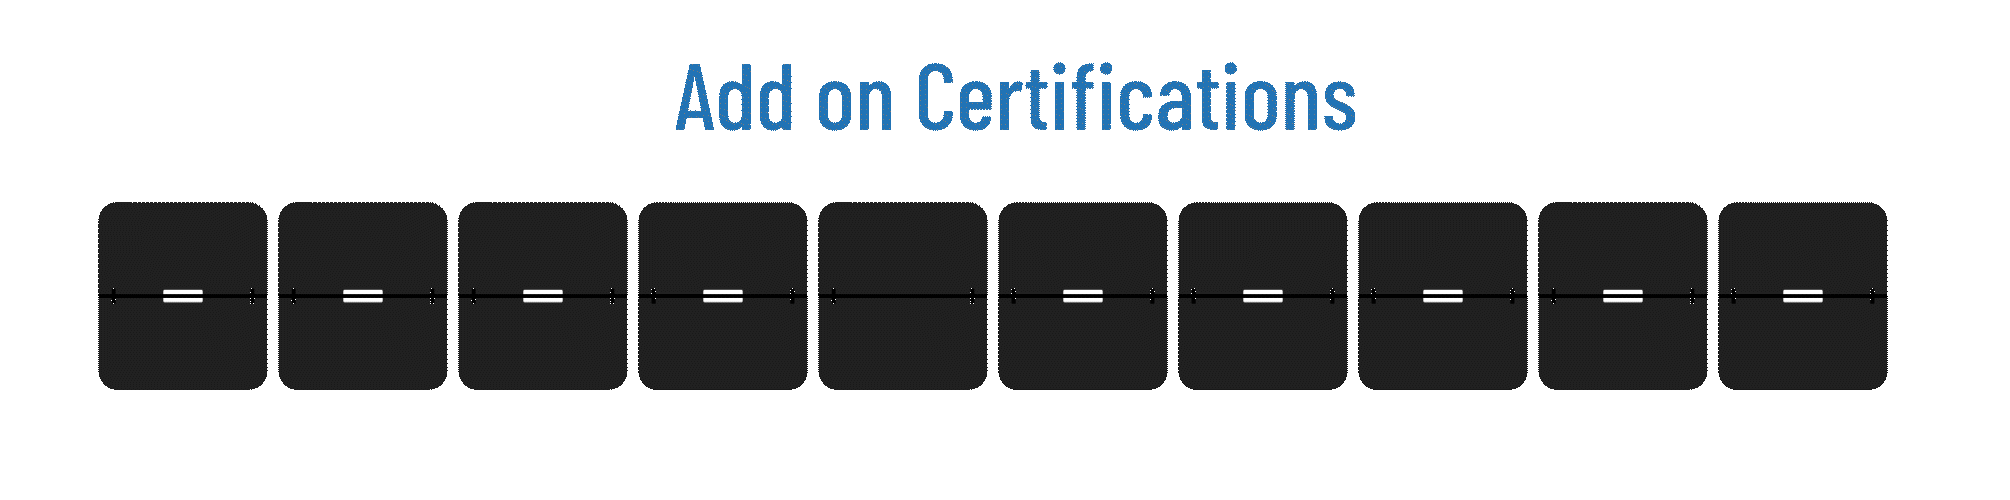 Add-On Certifications: Less than 2 week